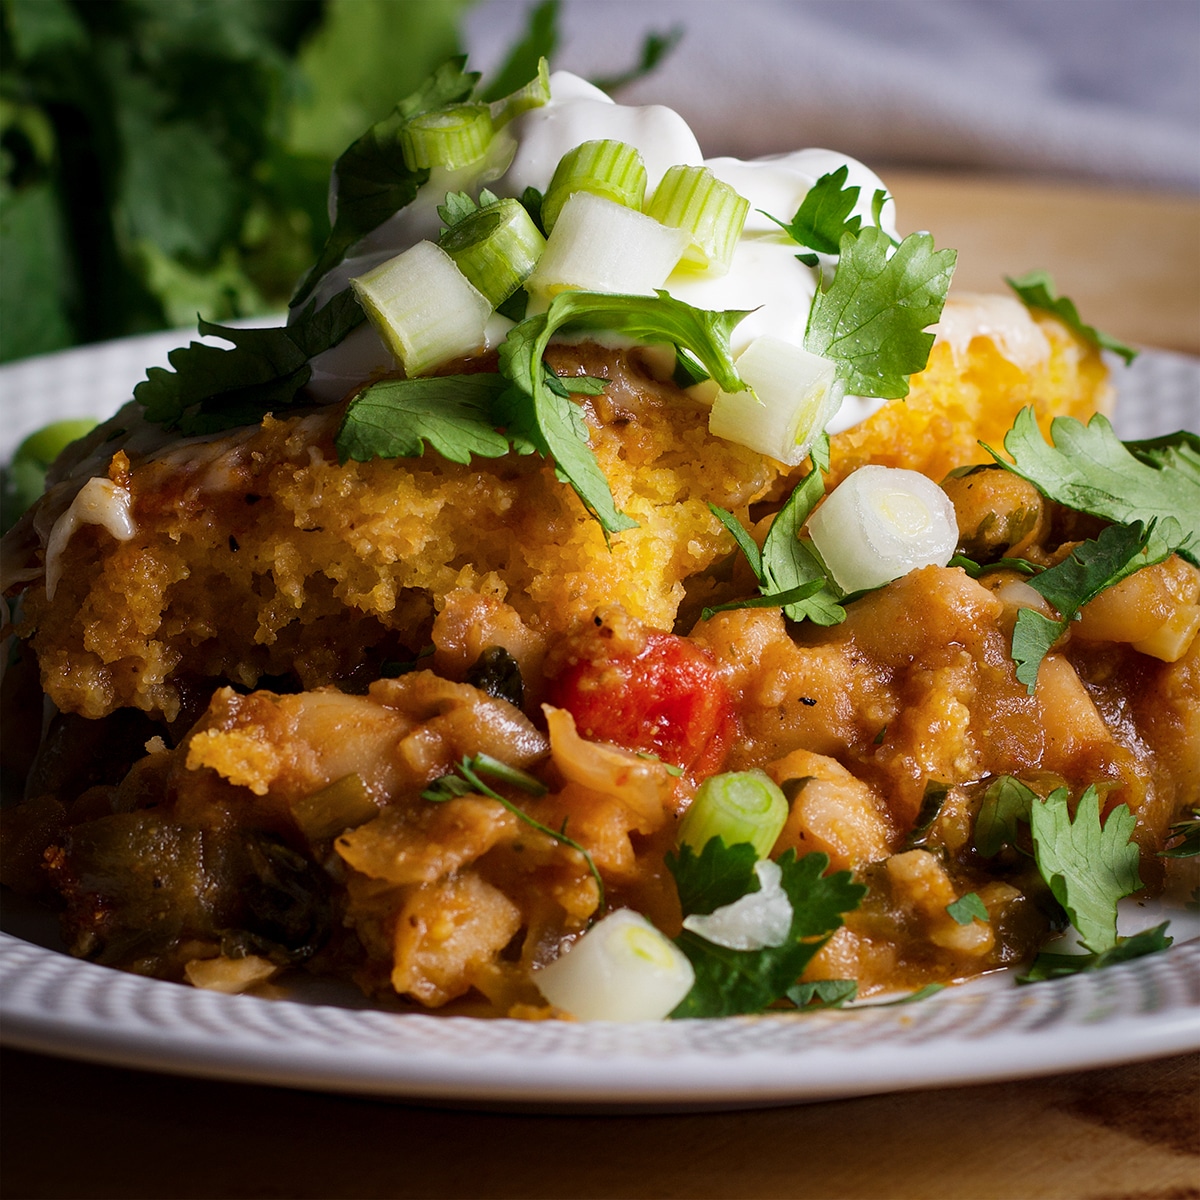 A small plate piled high with a generous serving of tamale pie.